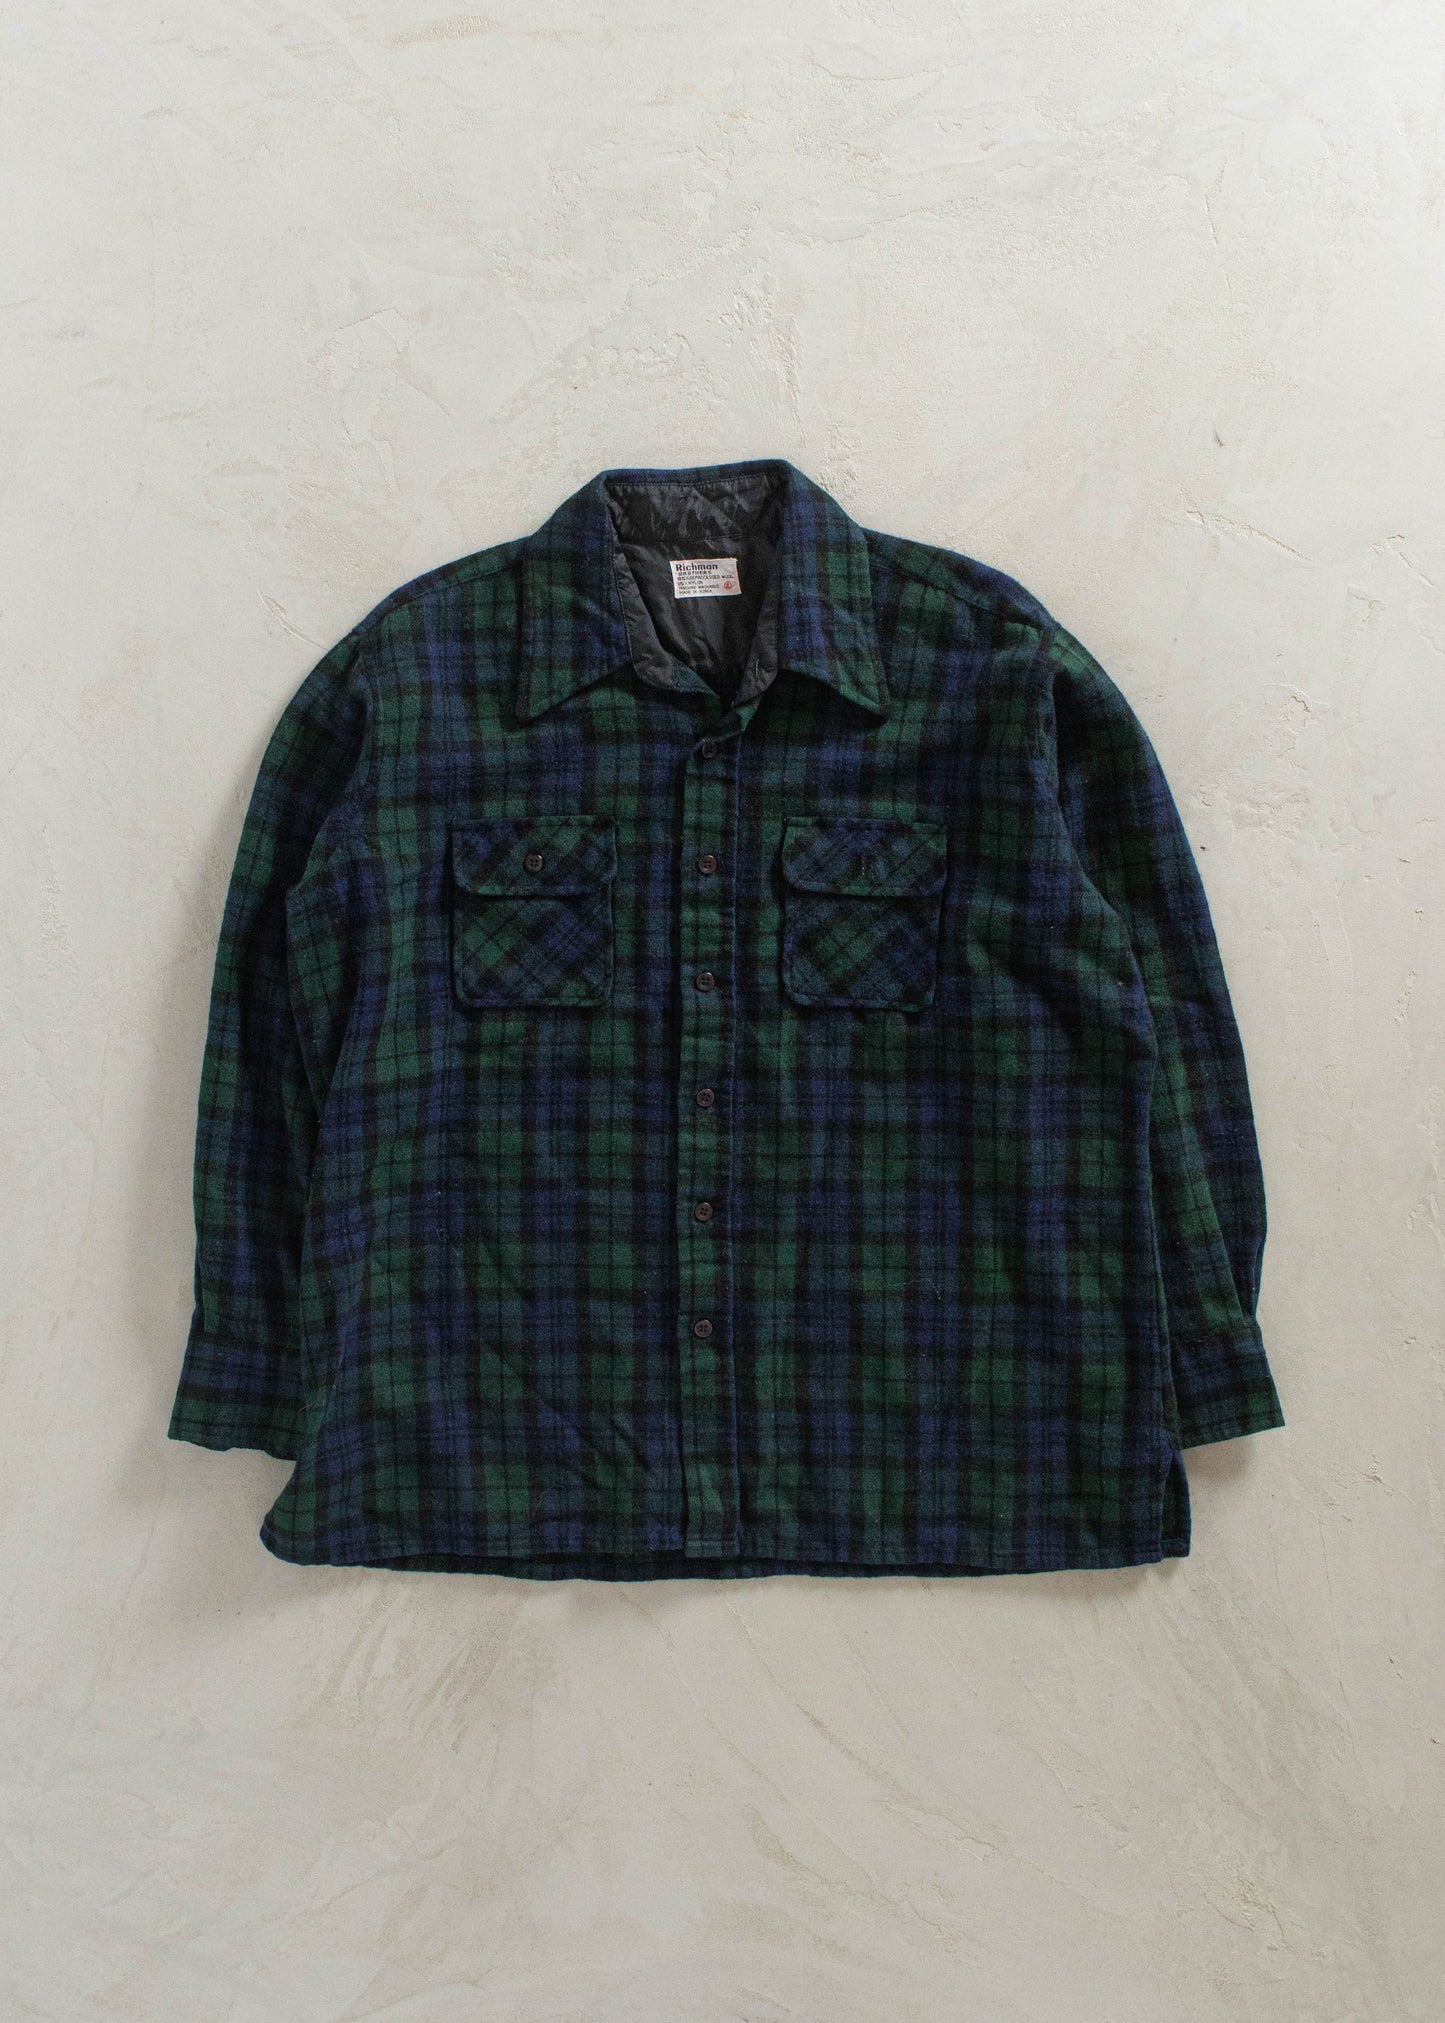 1990s Richman Brothers Wool Flannel Button Up Shirt Size L/XL